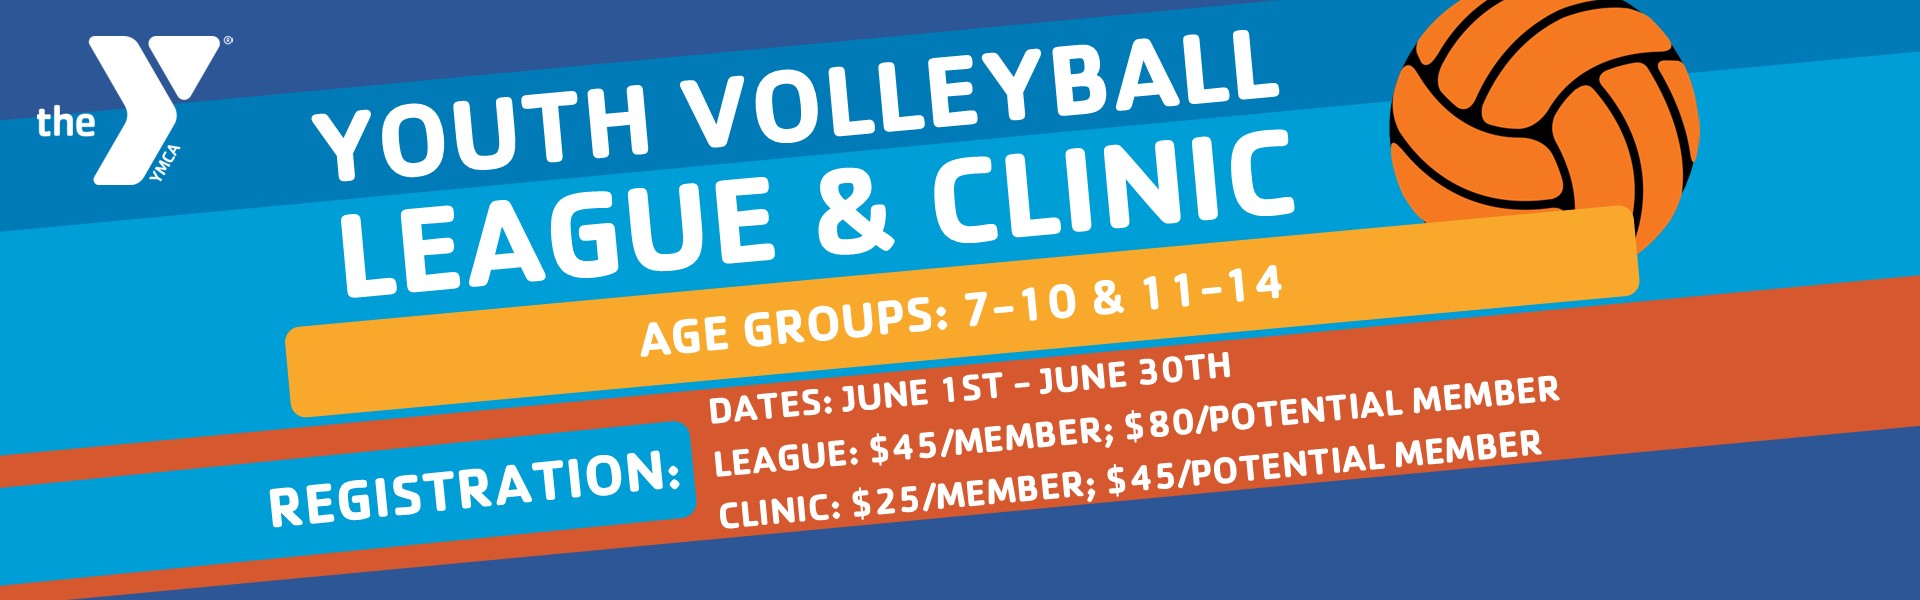 YOUTH VOLLEYBALL CLINIC